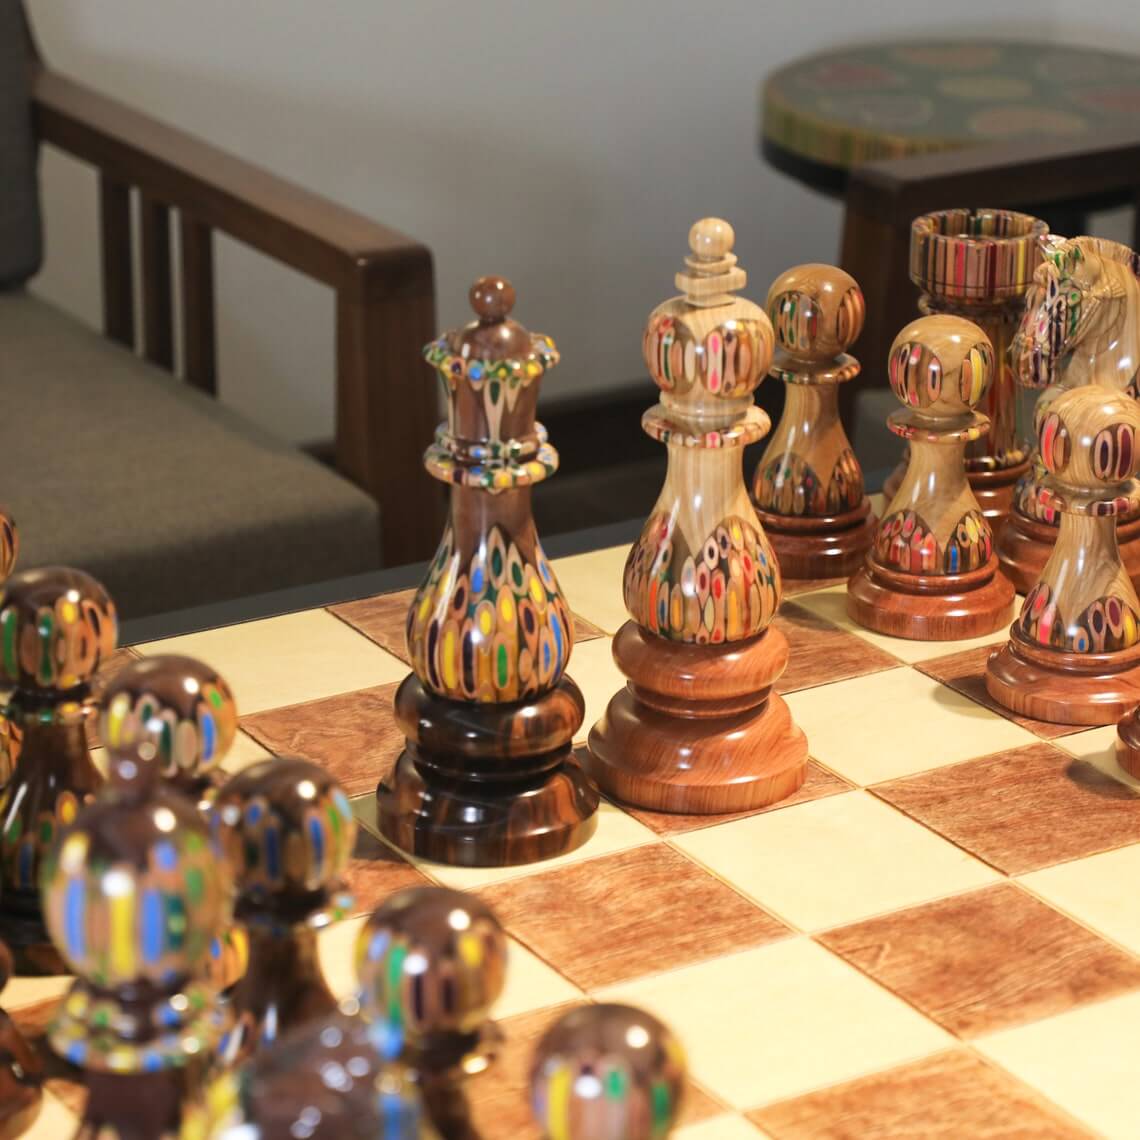 Deluxe Decorative King & Queen Chess Pieces (7)